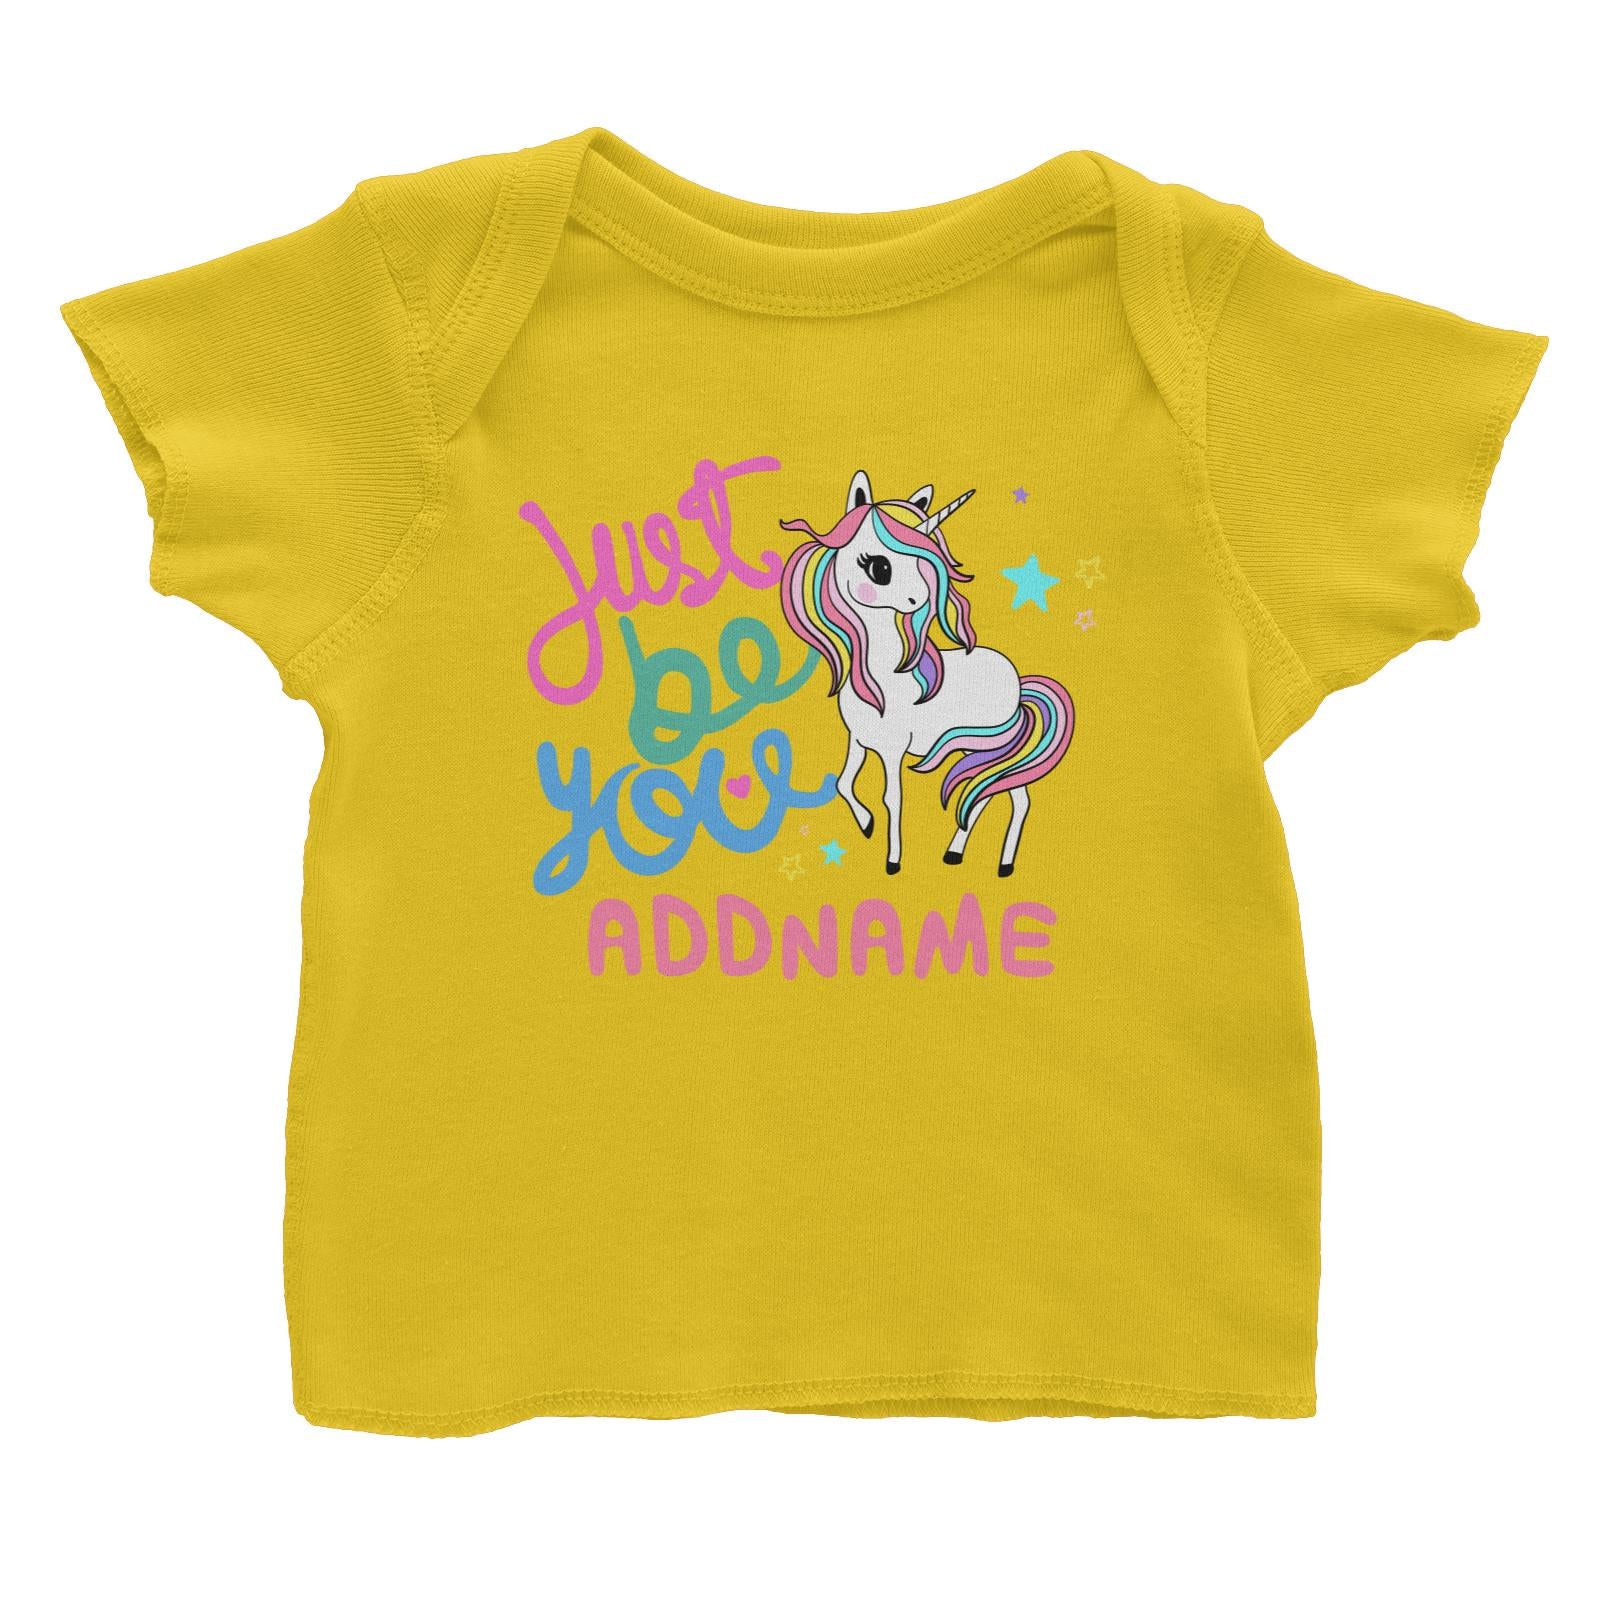 Children's Day Gift Series Just Be You Cute Unicorn Addname Baby T-Shirt